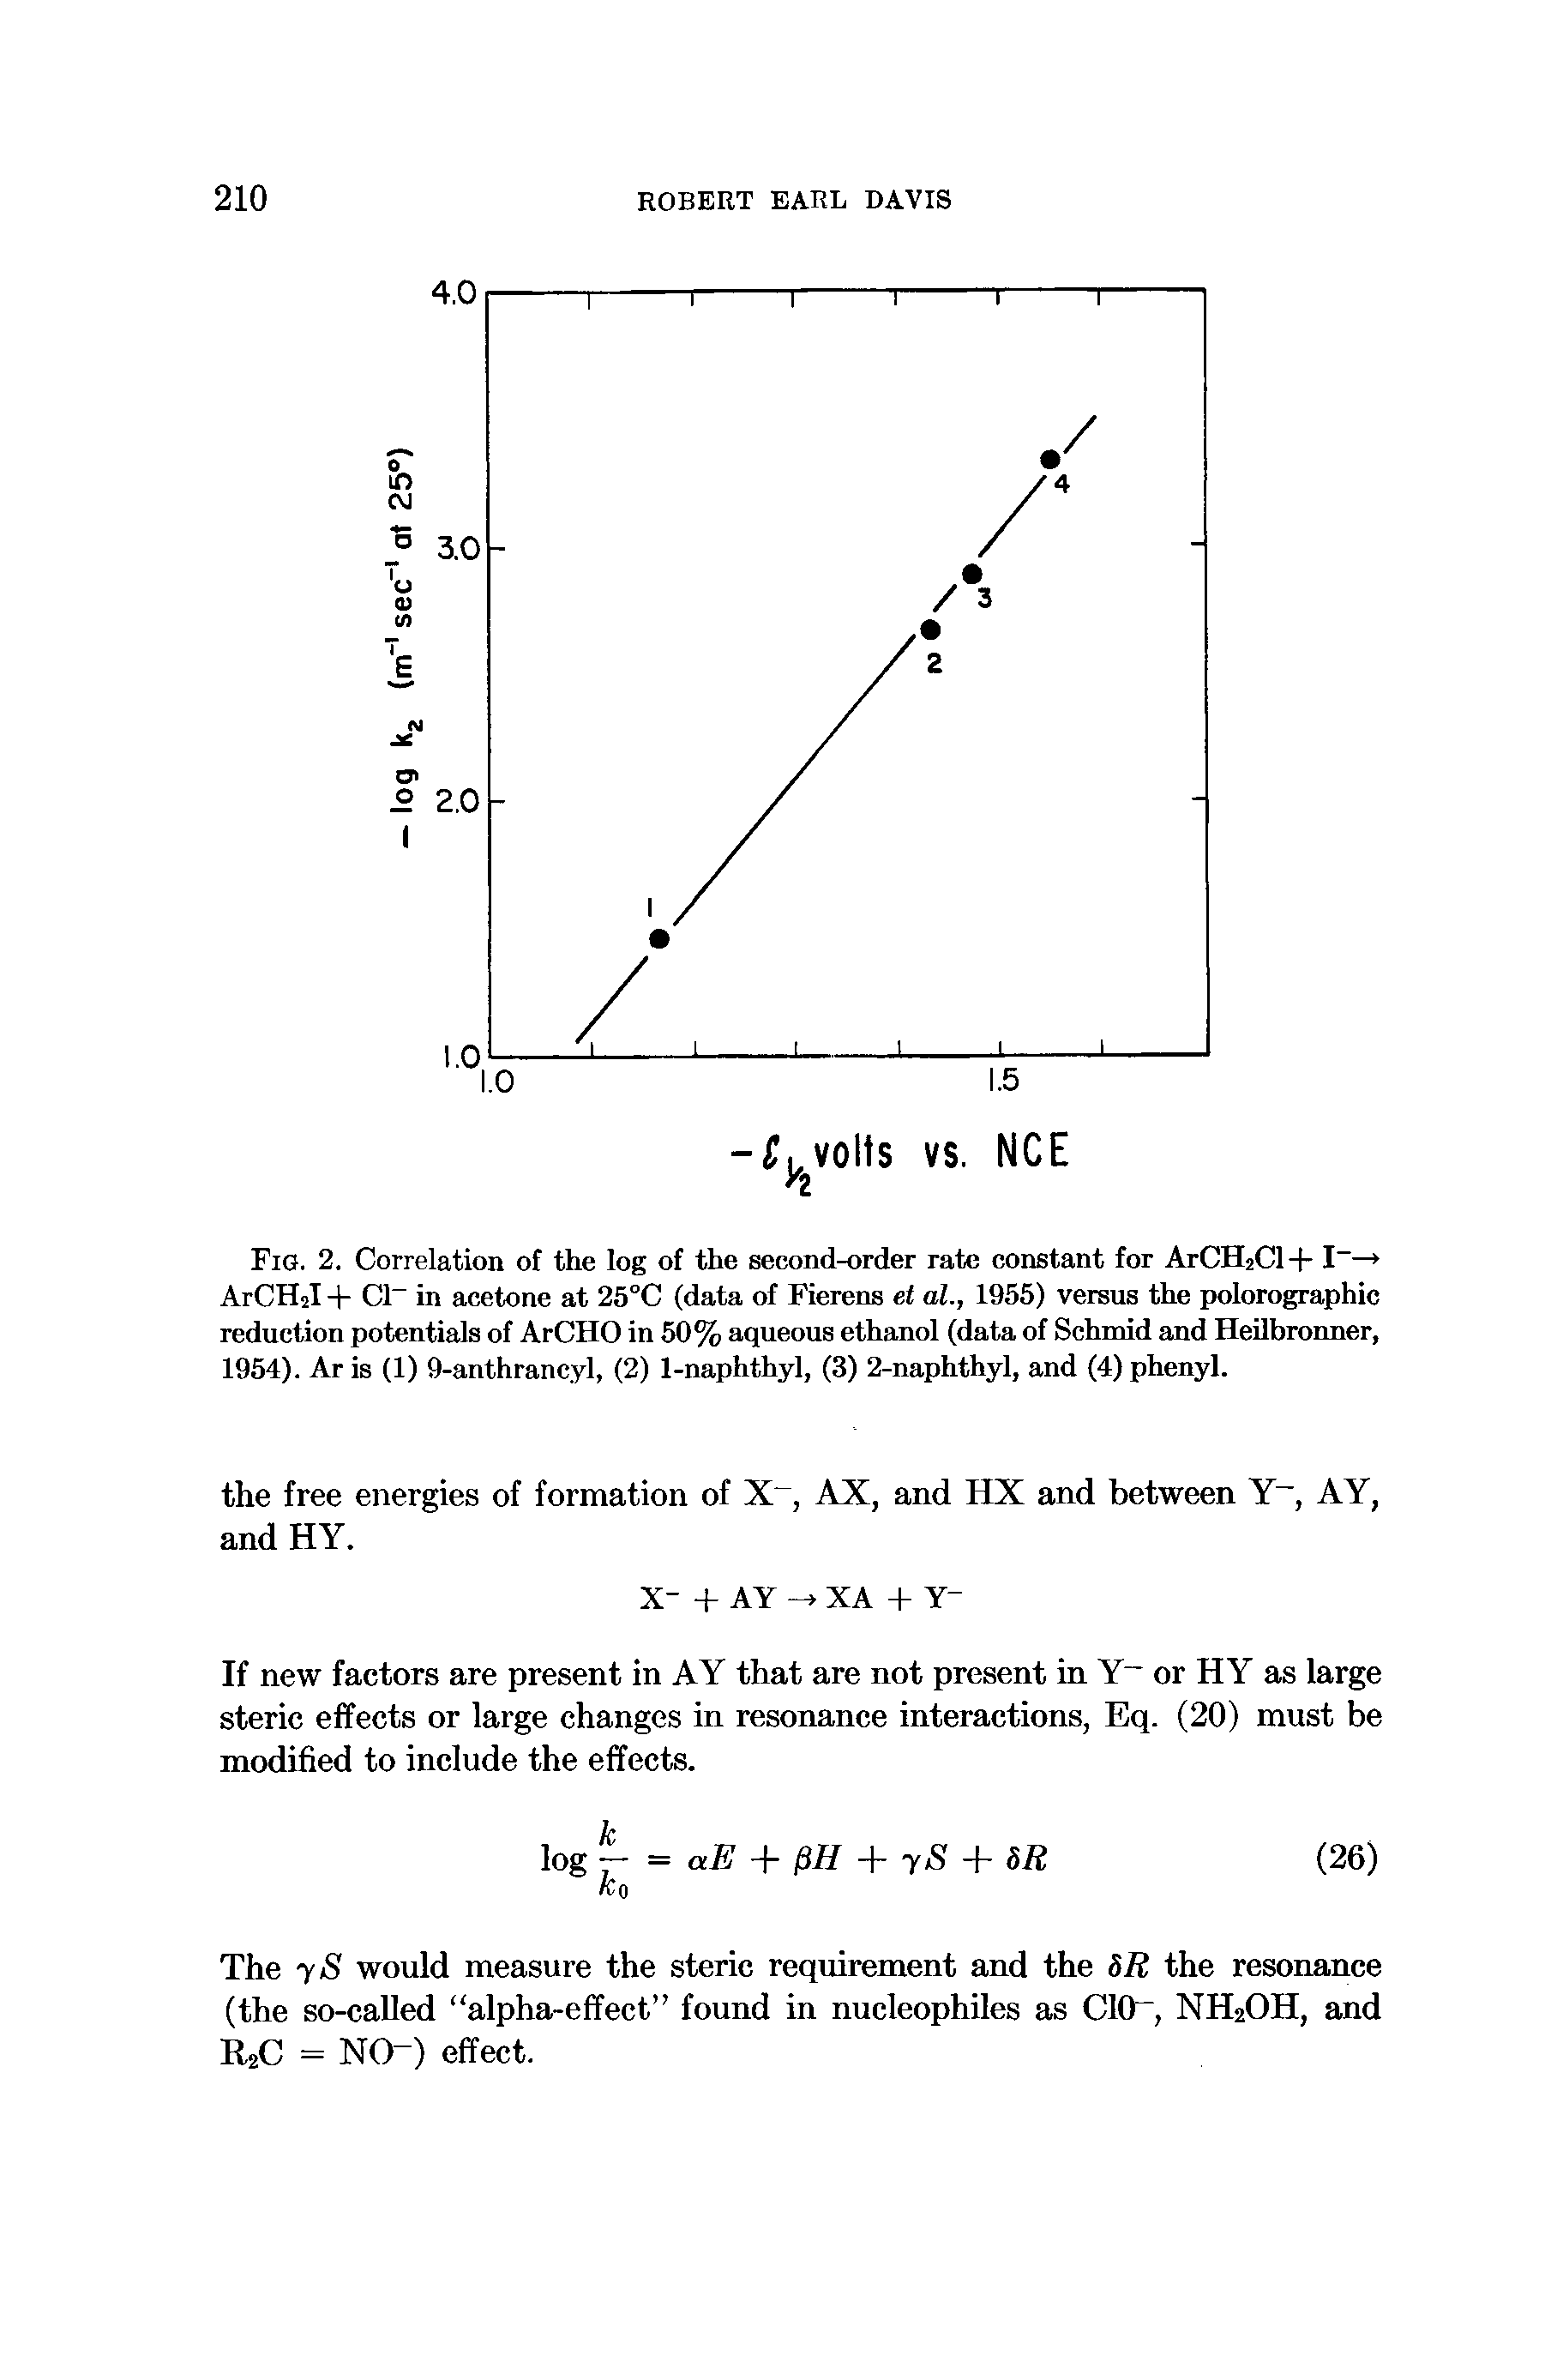 Fig. 2. Correlation of the log of the second-order rate constant for ArCH2Cl-t- I —> ArCHjI -i- Cl in acetone at 25°C (data of Fierens et al., 1955) versus the polorographic reduction potentials of ArCHO in 50% aqueous ethanol (data of Schmid and Heilbronner, 1954). Aris (1) 9-anthrancyl, (2) 1-naphthyl, (3) 2-naphthyl, and (4) phenyl.